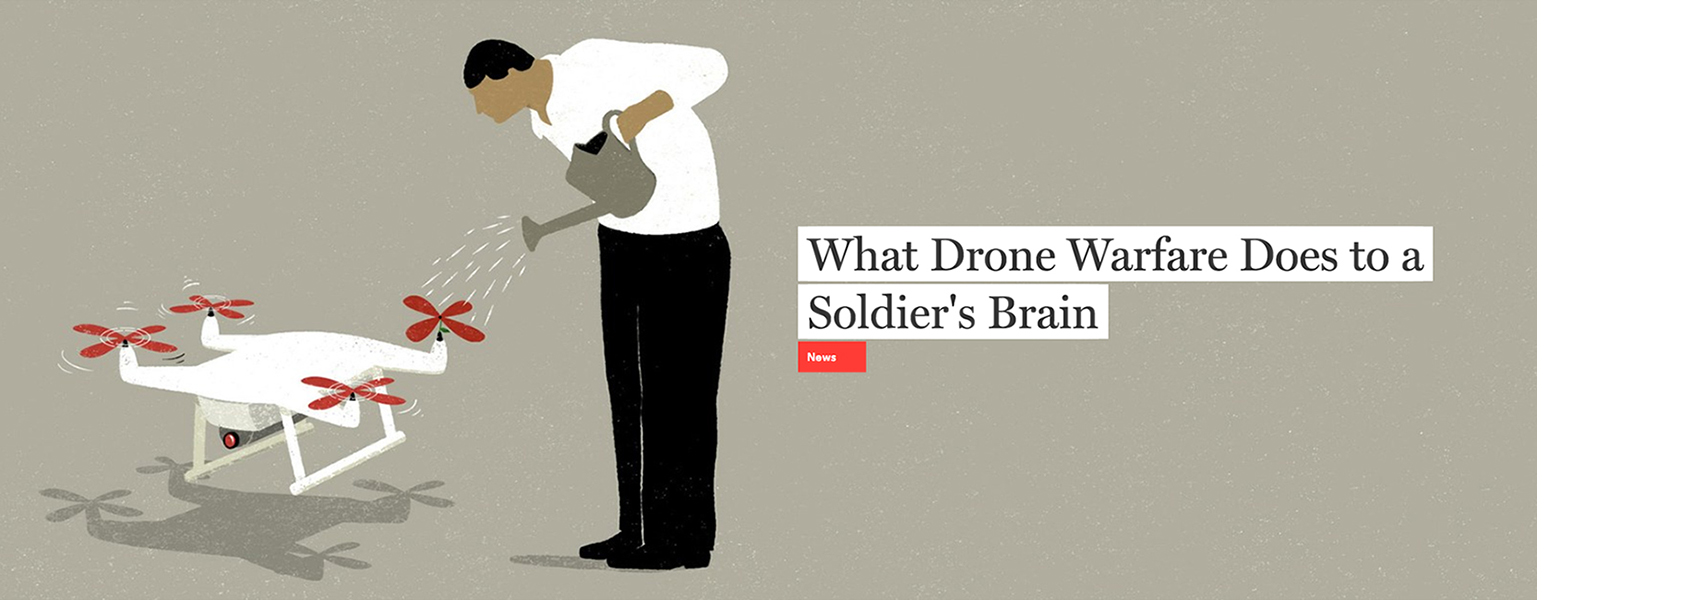 GQ- What drone warfare does to a soldier's brain